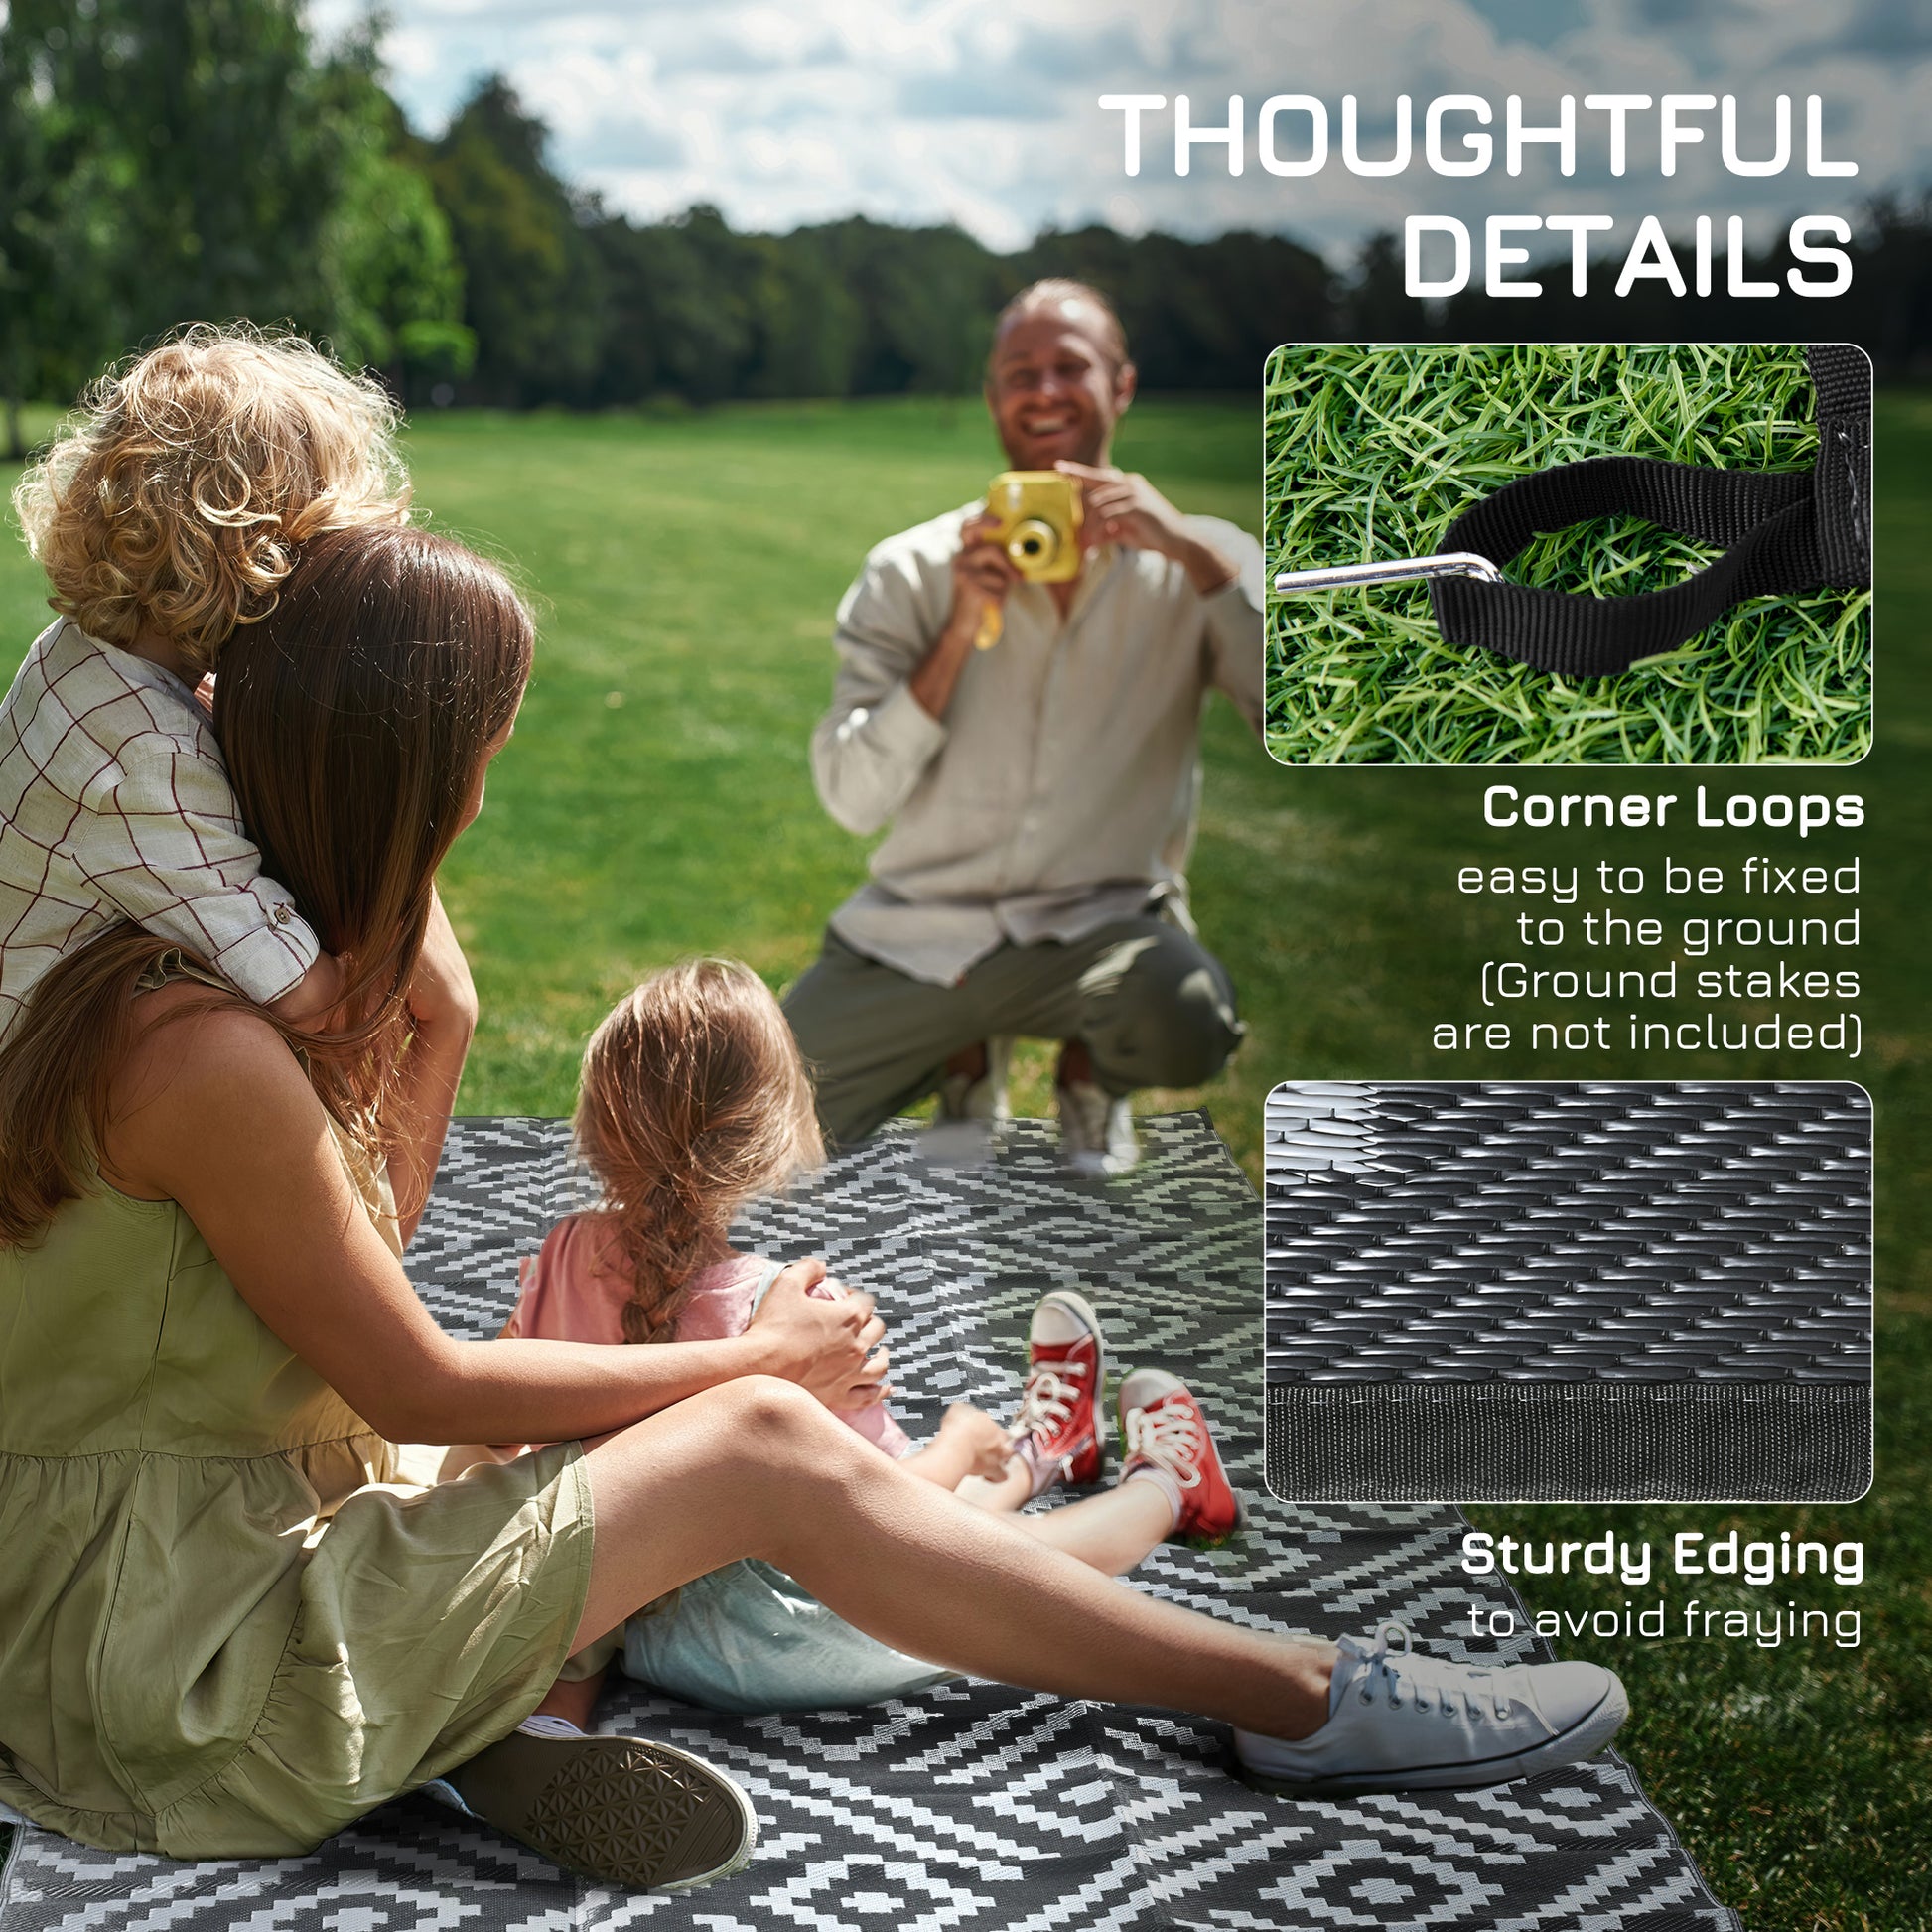 Reversible Outdoor Rug Waterproof Plastic Straw RV Rug with Carry Bag, 8' x 10', Black and Grey Geometric at Gallery Canada